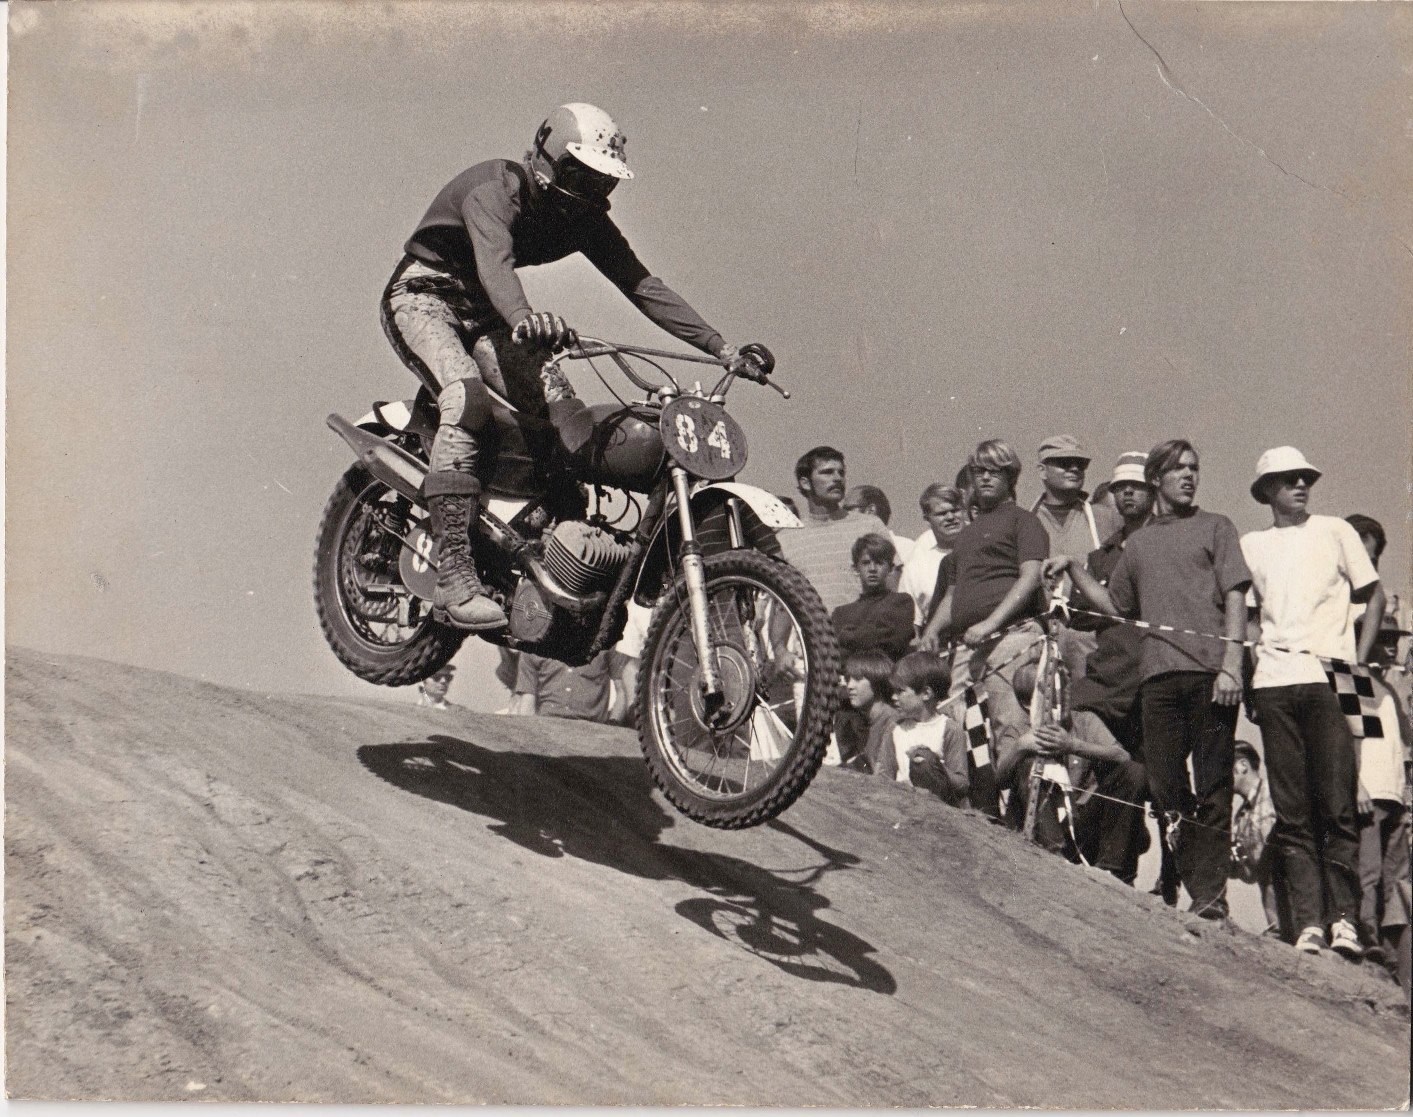 AMA Hall of Famer Mary McGee jumping a hill on a motorcycle during a 1967 race, showcasing her legendary skills